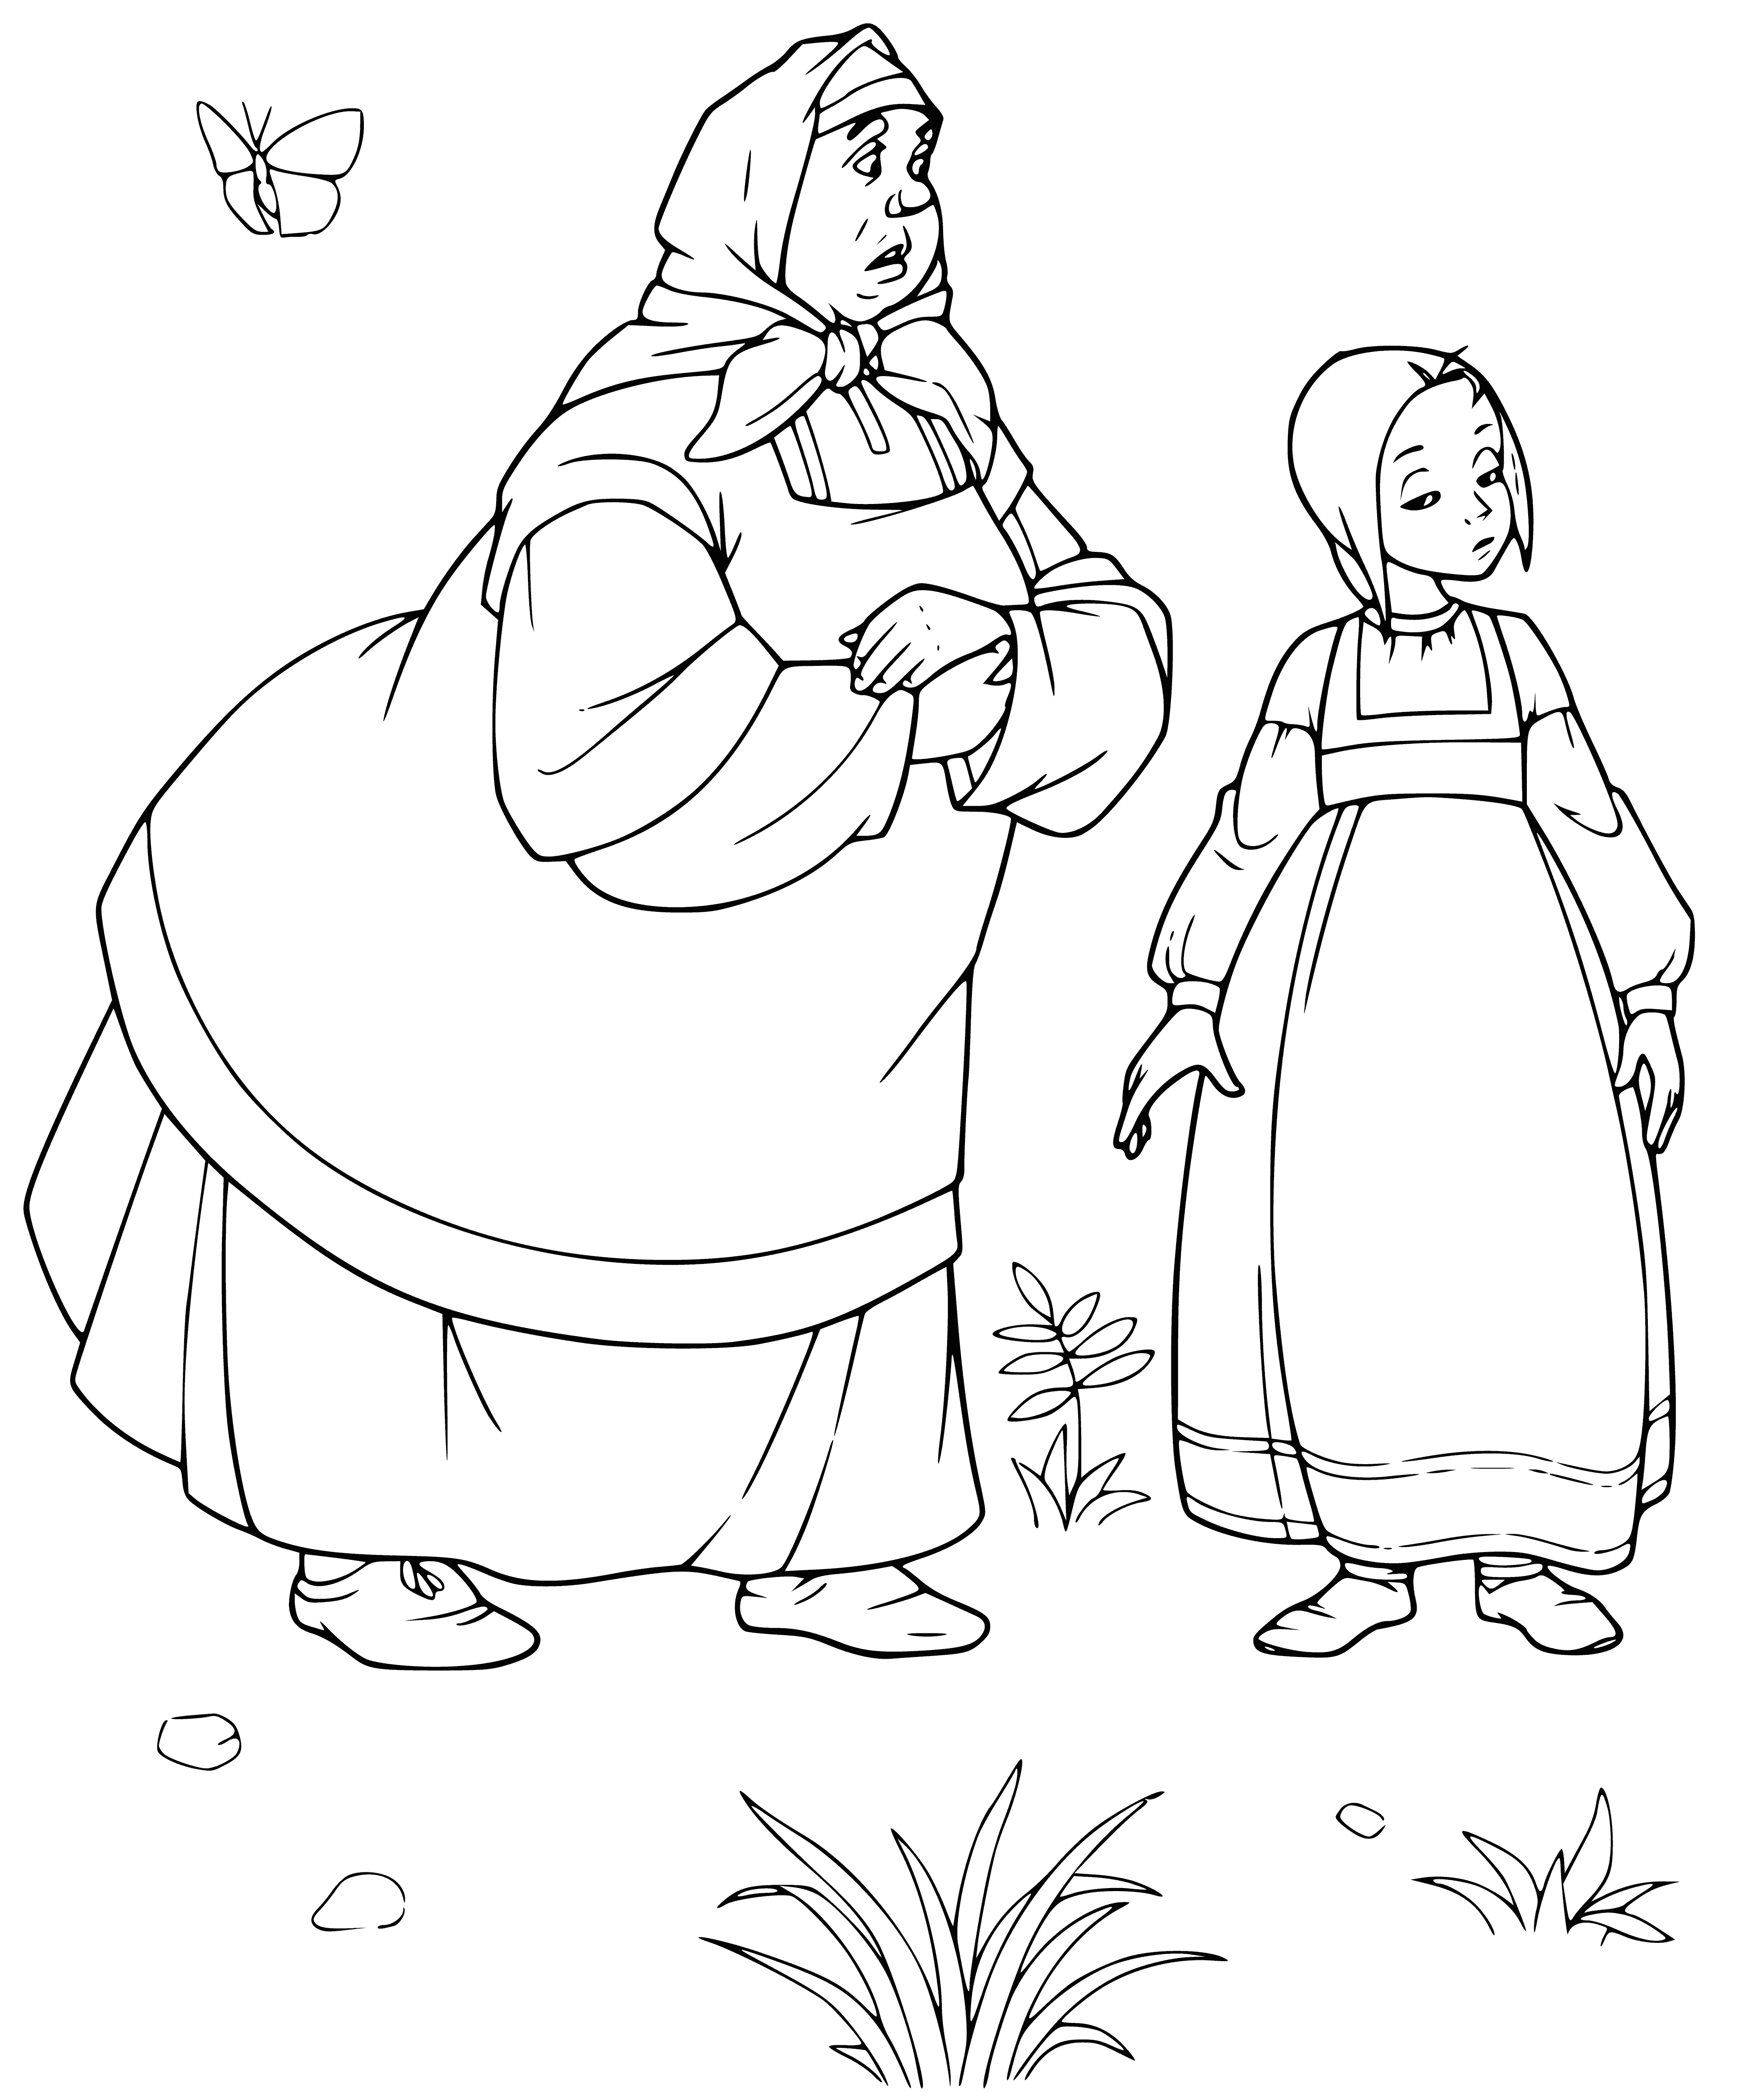 coloring page: Man and woman with baby, nanny holding another, man with whip and all wearing hats.